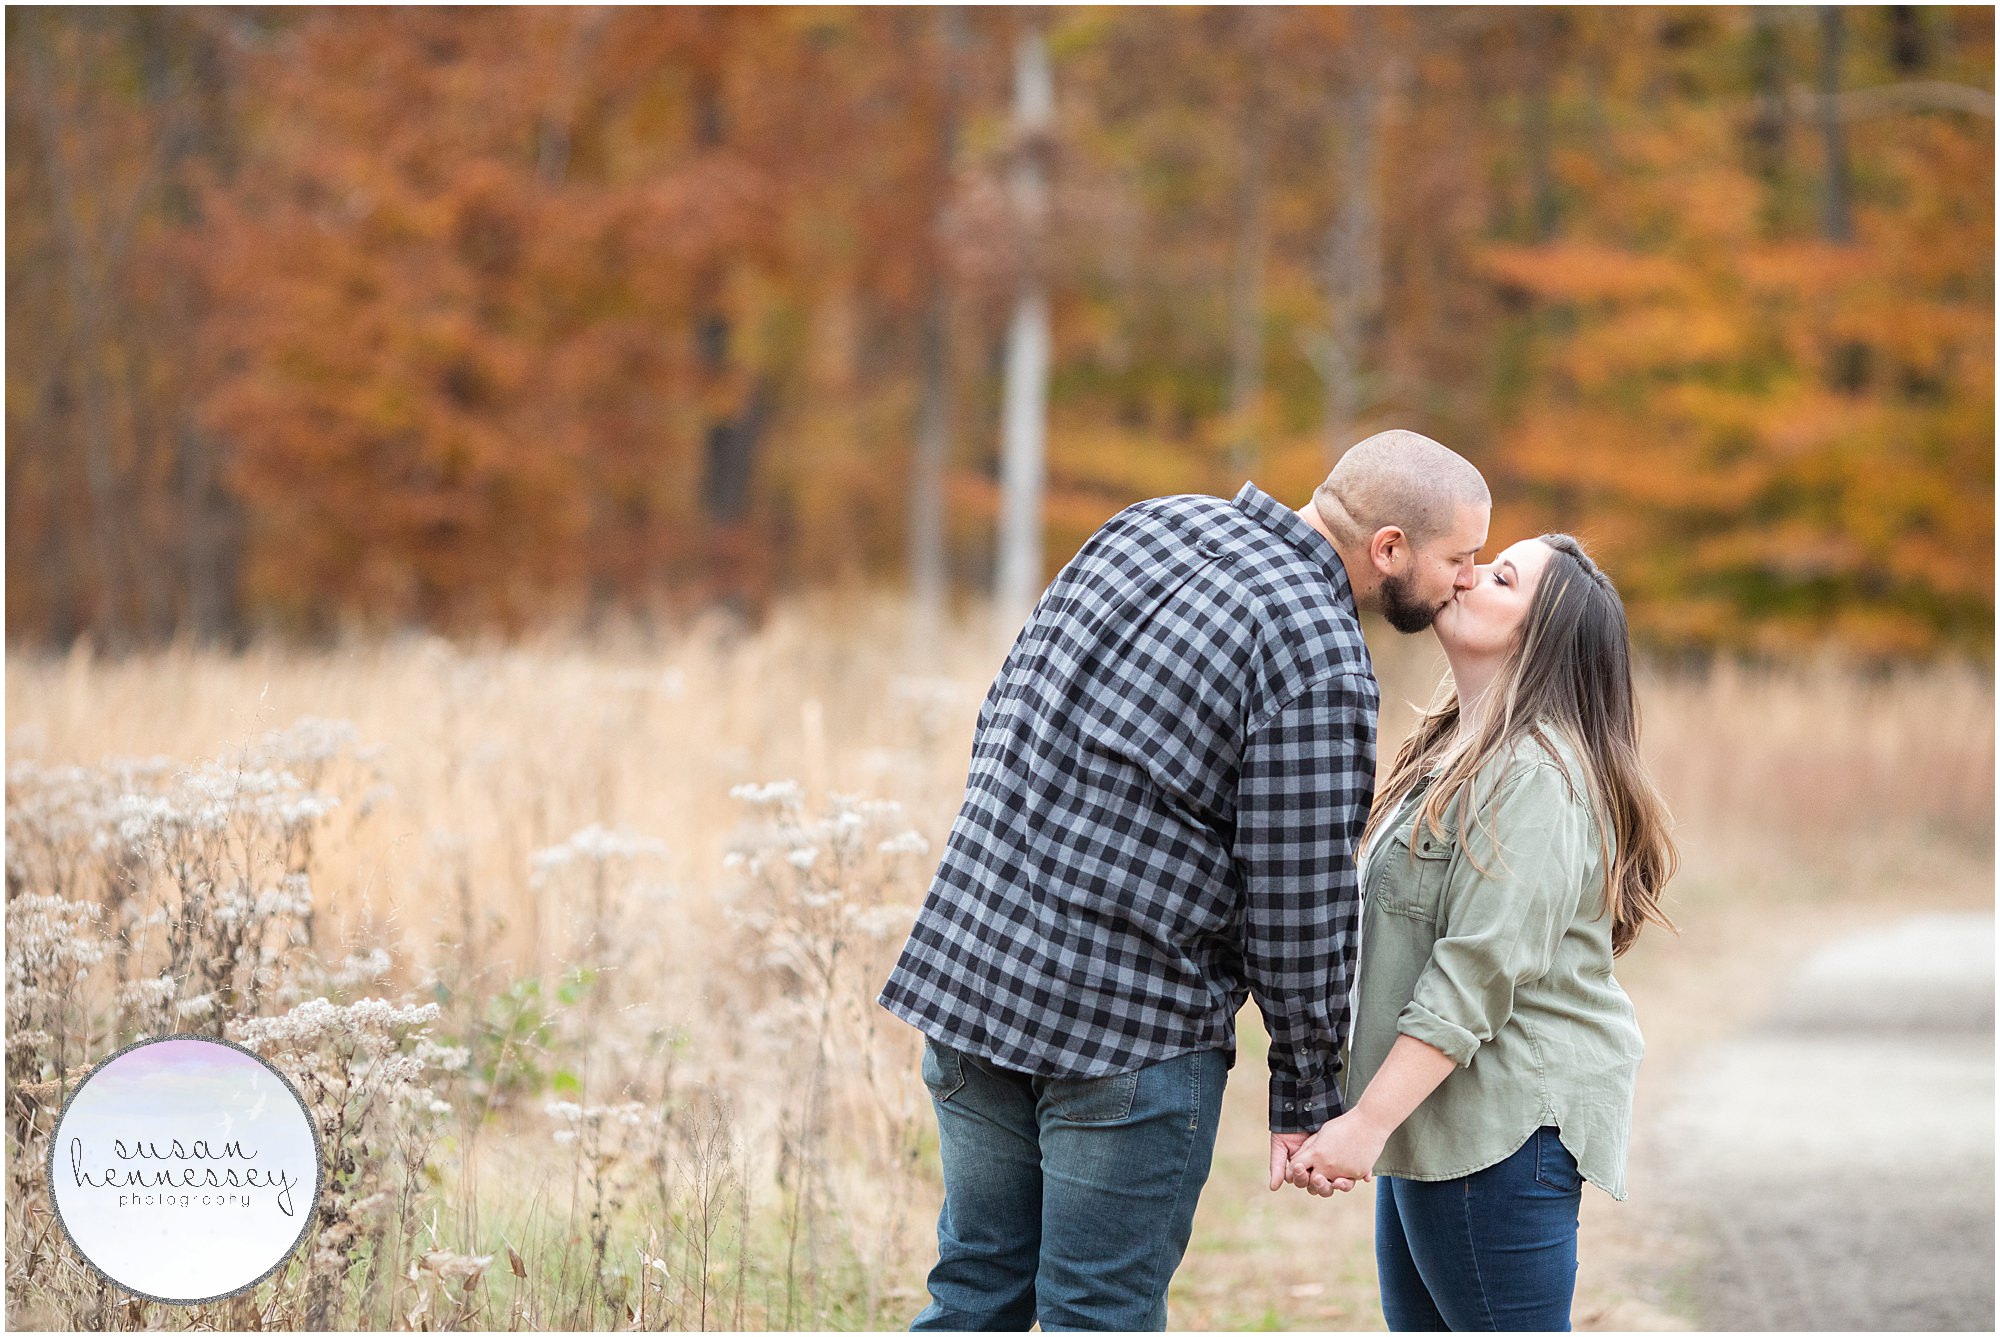 A fall engagement session at Smithville Park